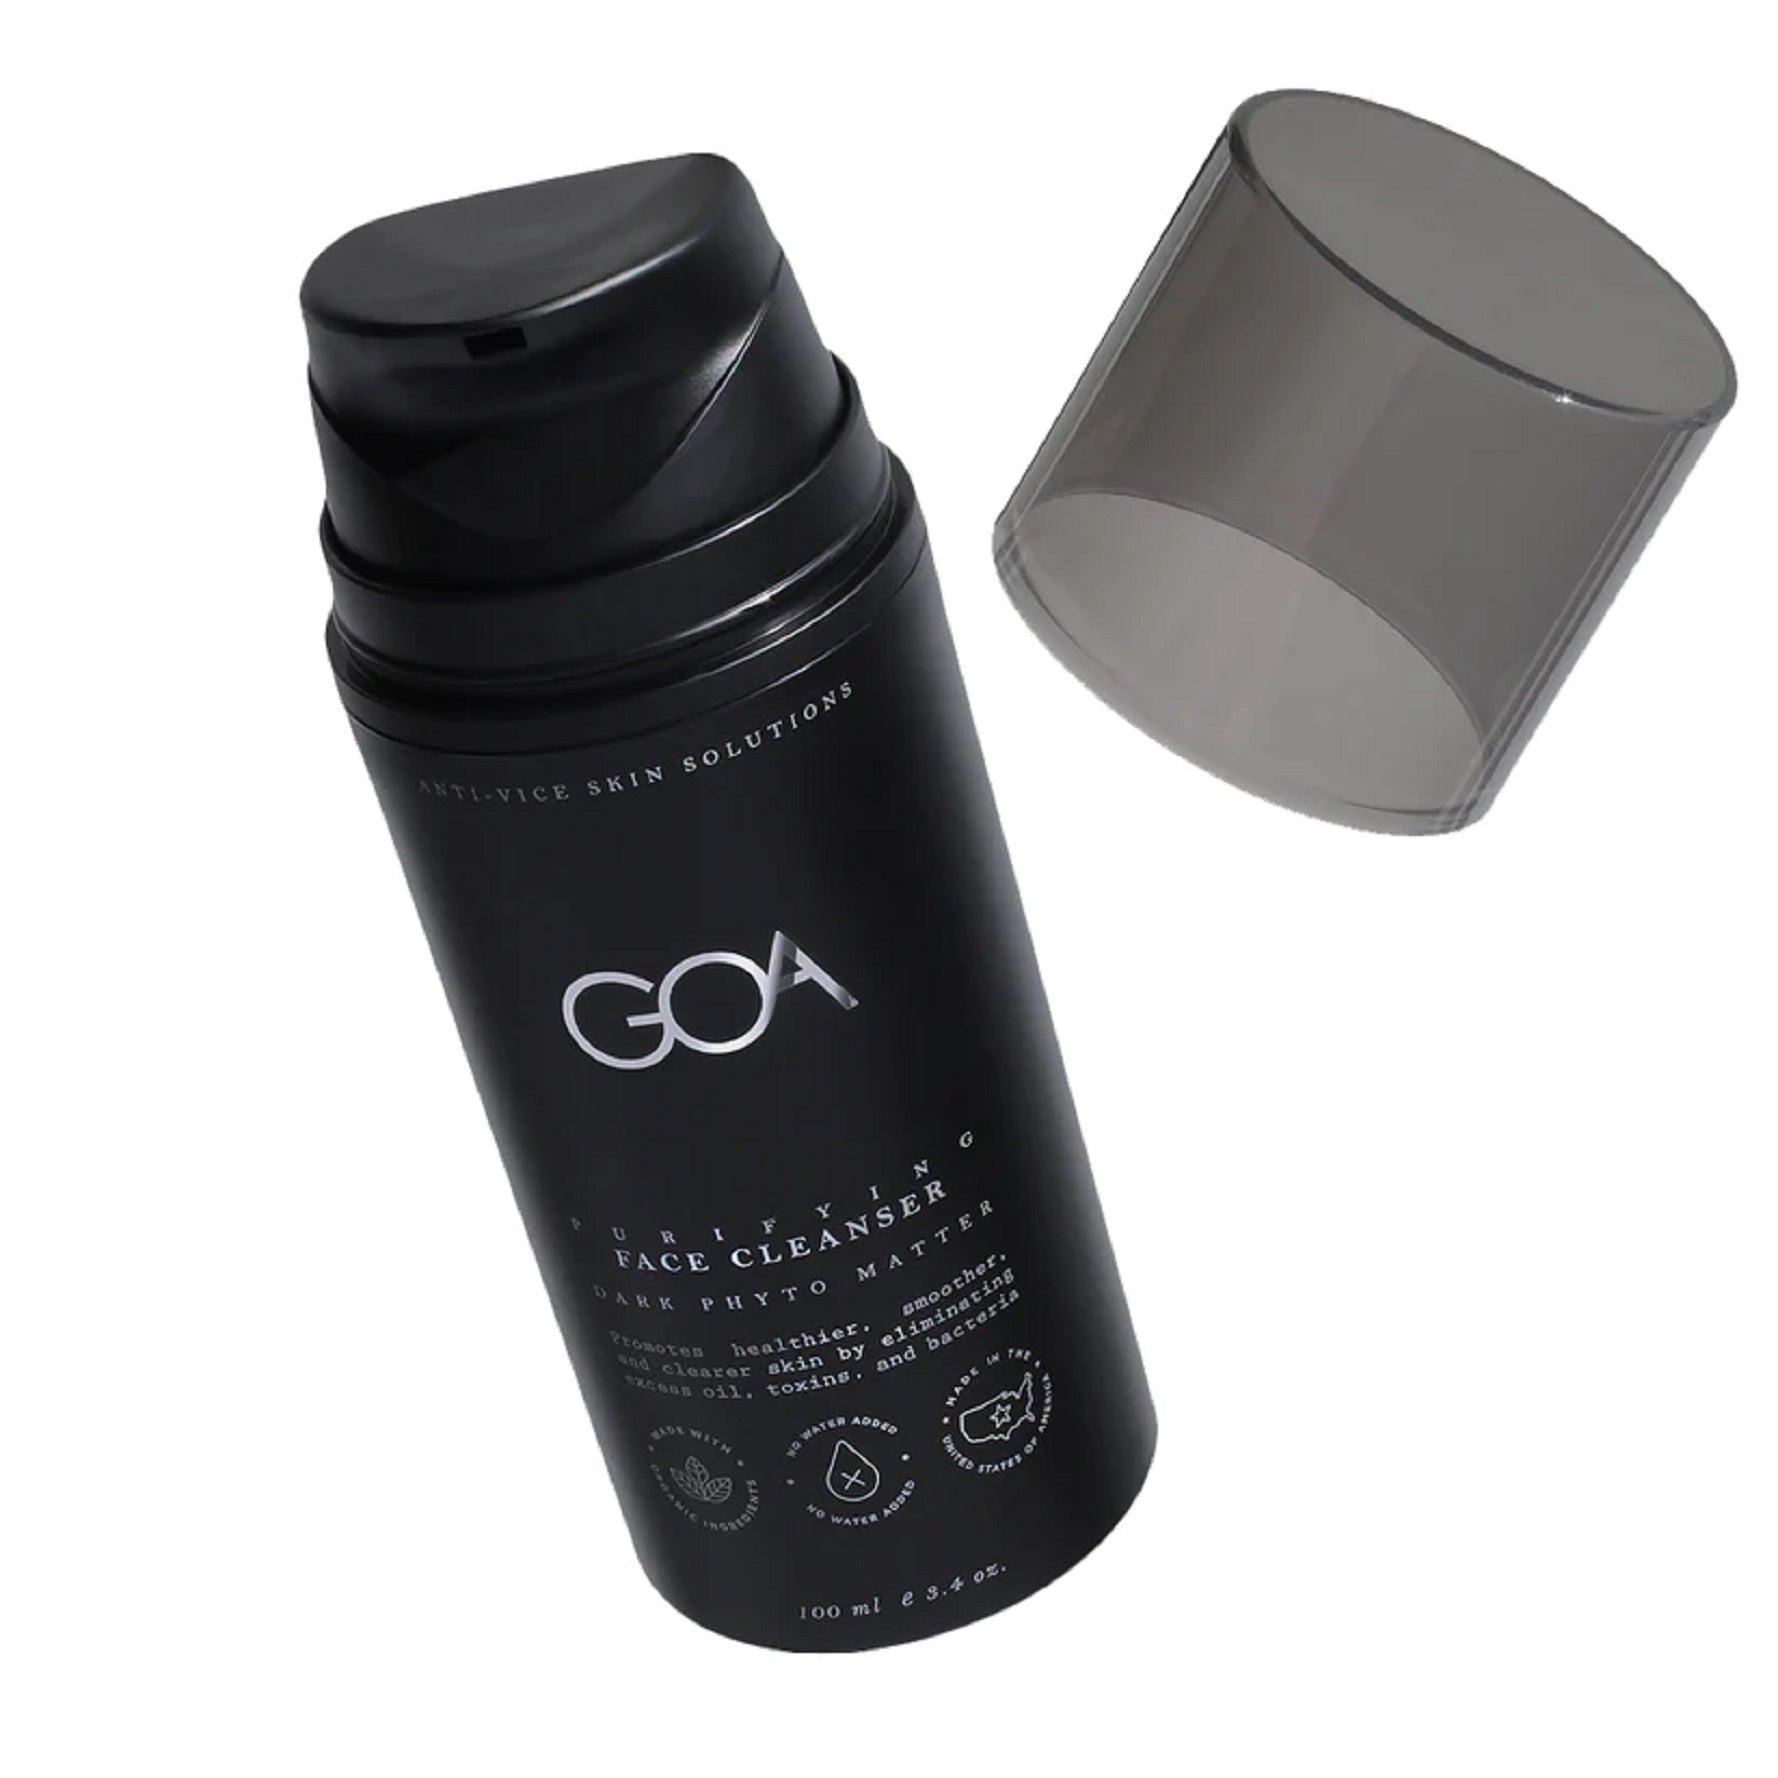 GOA - Purifying Face Cleanser